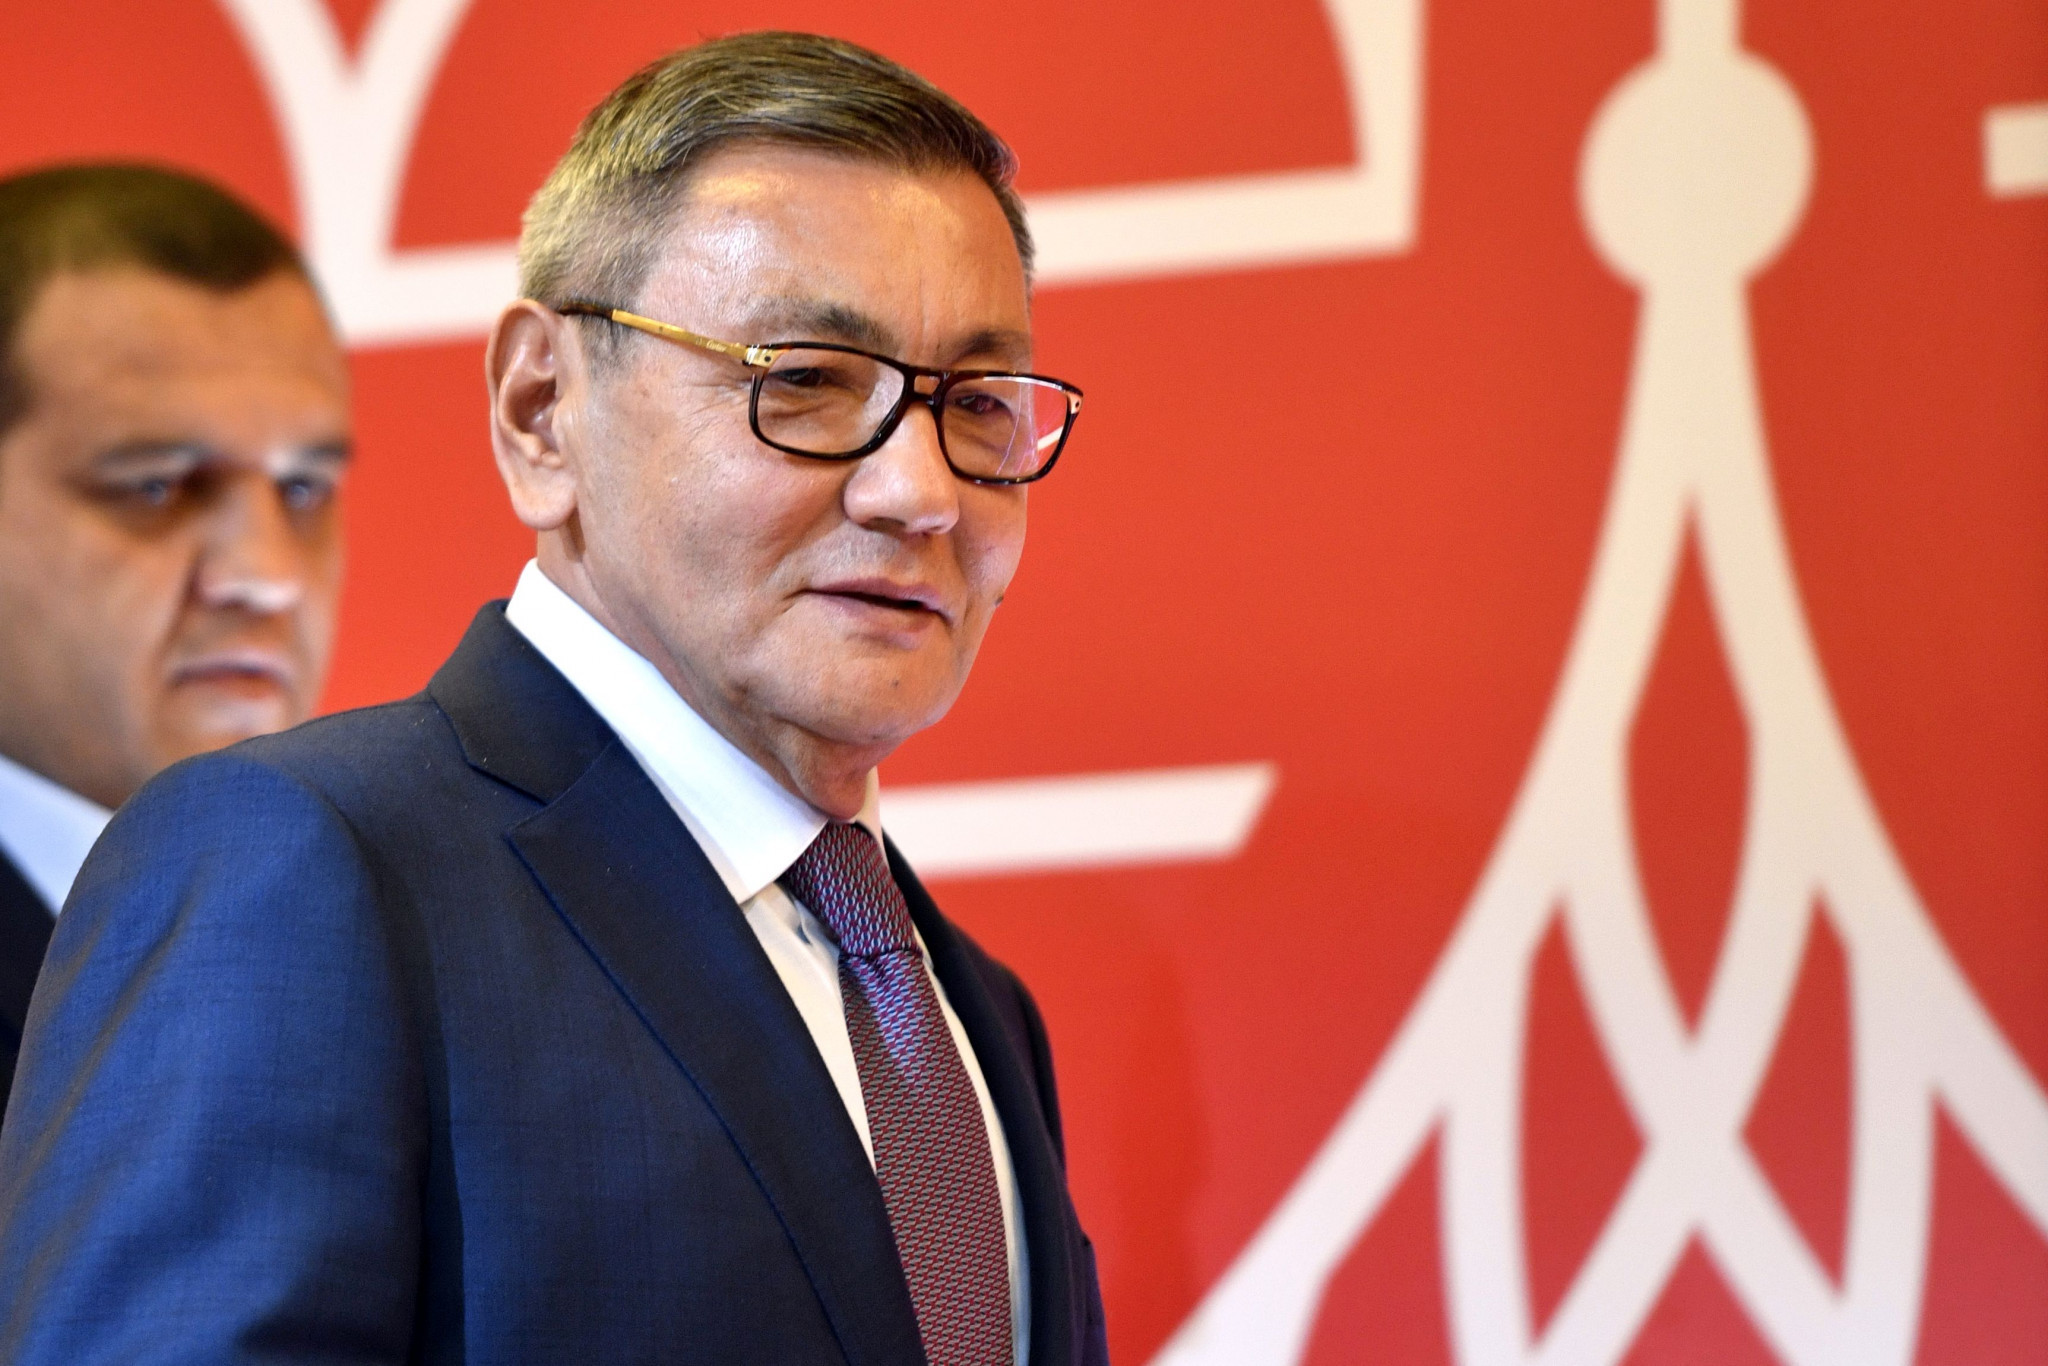 AIBA President Gafur Rakhimov has claimed the governing body is now in a position to confirm it has "finally and fully left the troubled past behind us" in a letter sent to all national member federations ©Getty Images